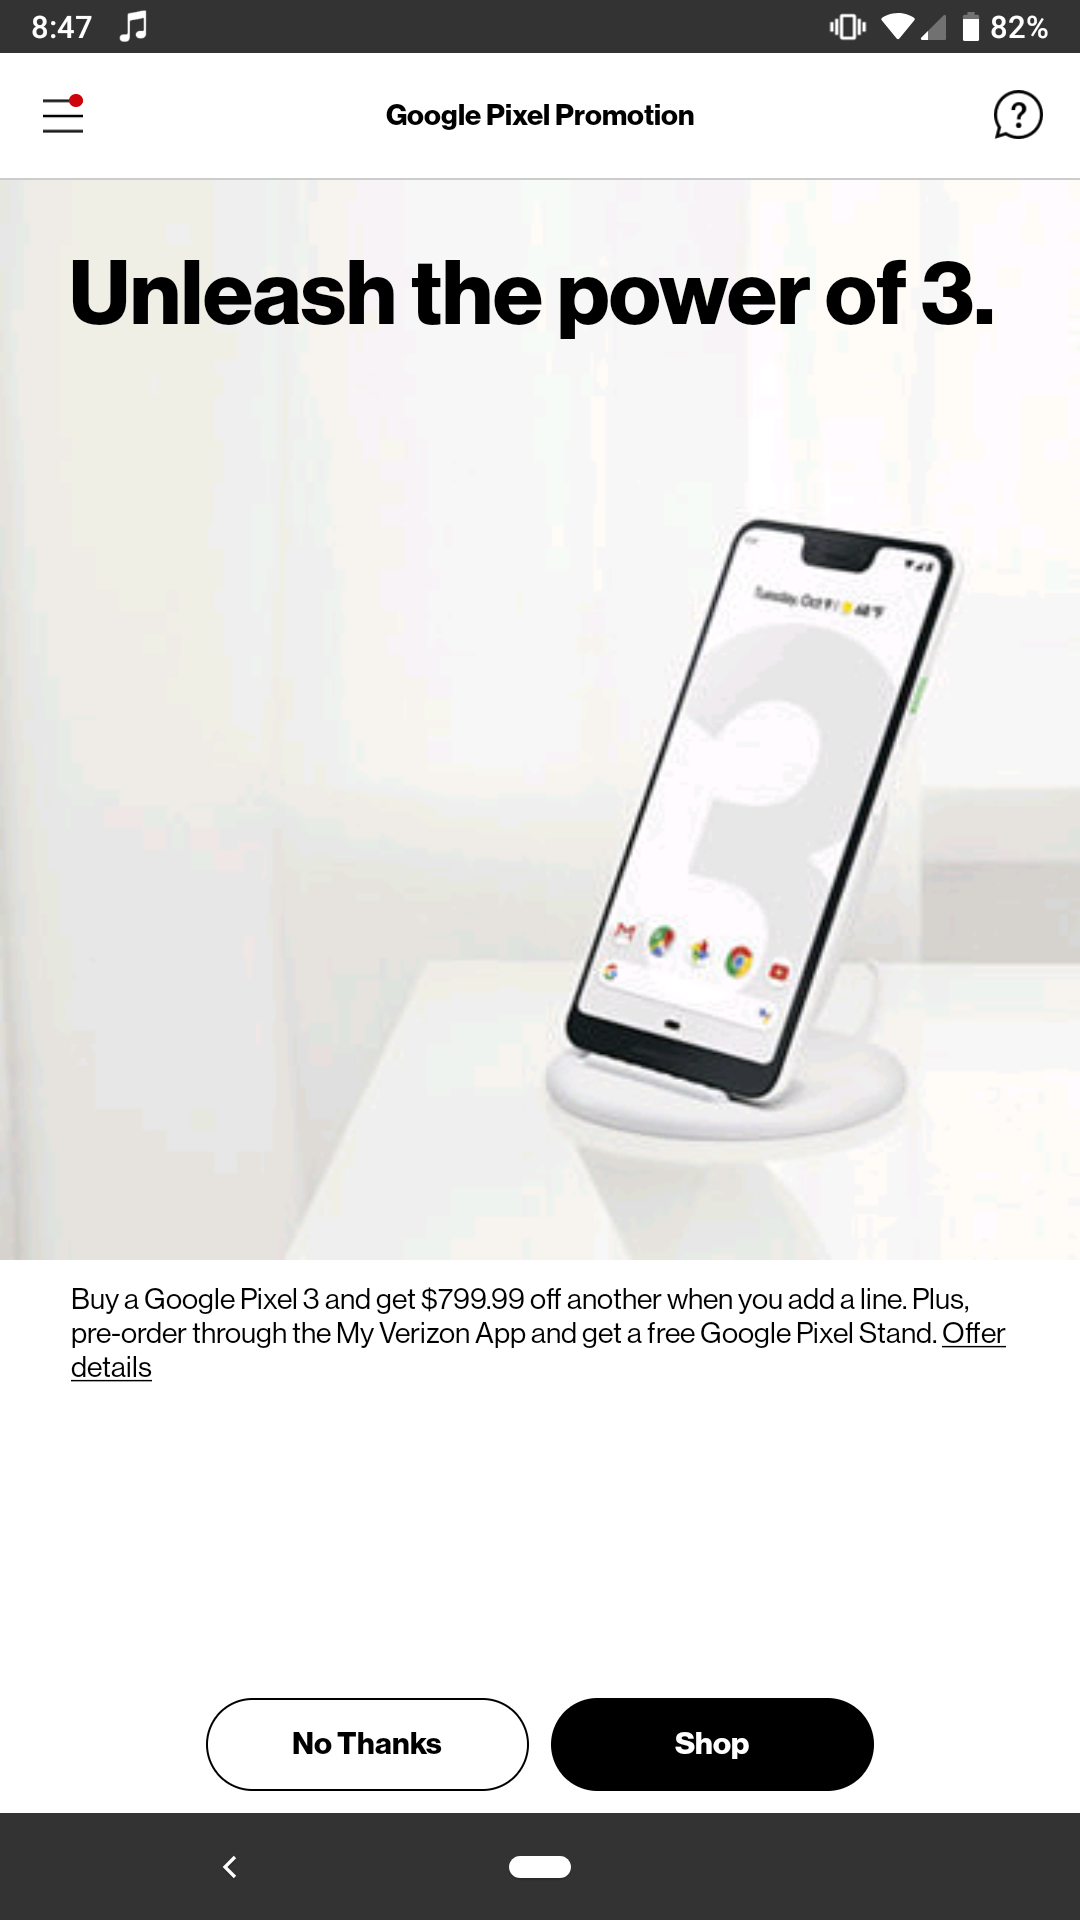 Get a free Pixel 3 from Verizon in a BOGO deal that adds the Pixel Stand charger as one-day offer